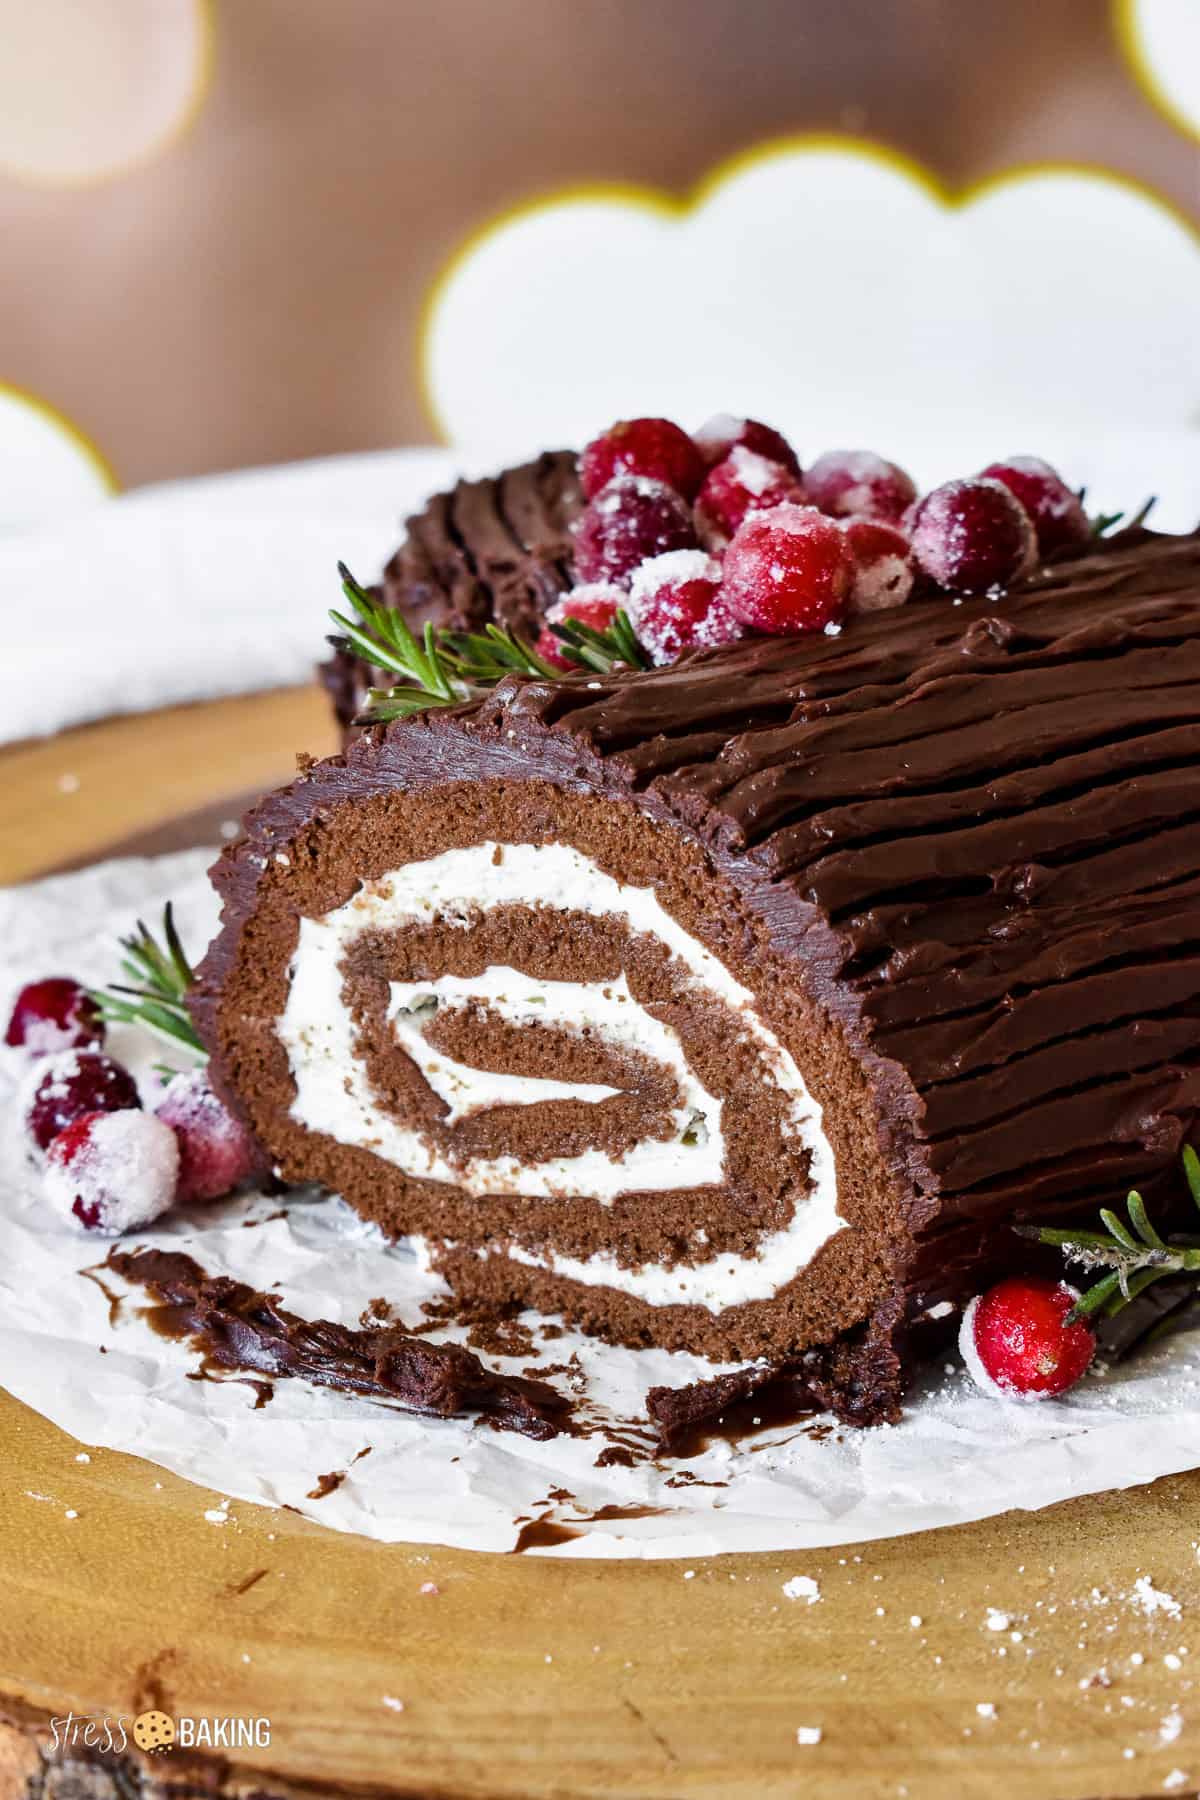 Chocolate yule log cake filled with whipped cream and decorated with sugared cranberries and rosemary twigs